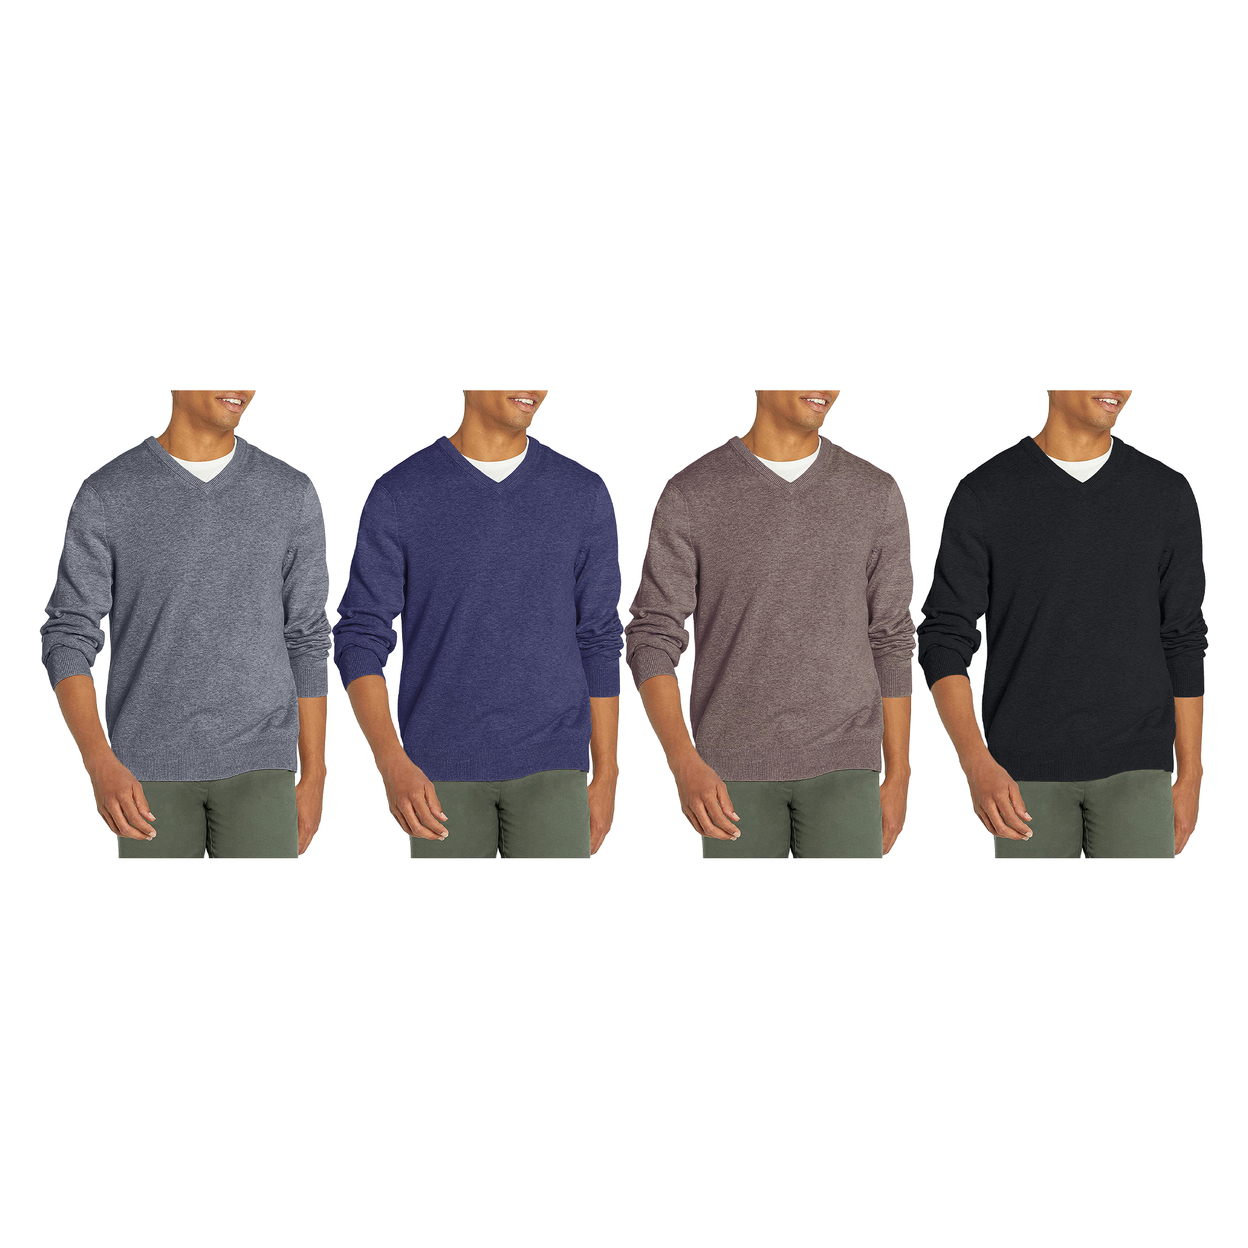 Multi-Pack: Men's Casual Ultra Soft Slim Fit Warm Knit V-Neck Sweater - 2-pack, Xx-large